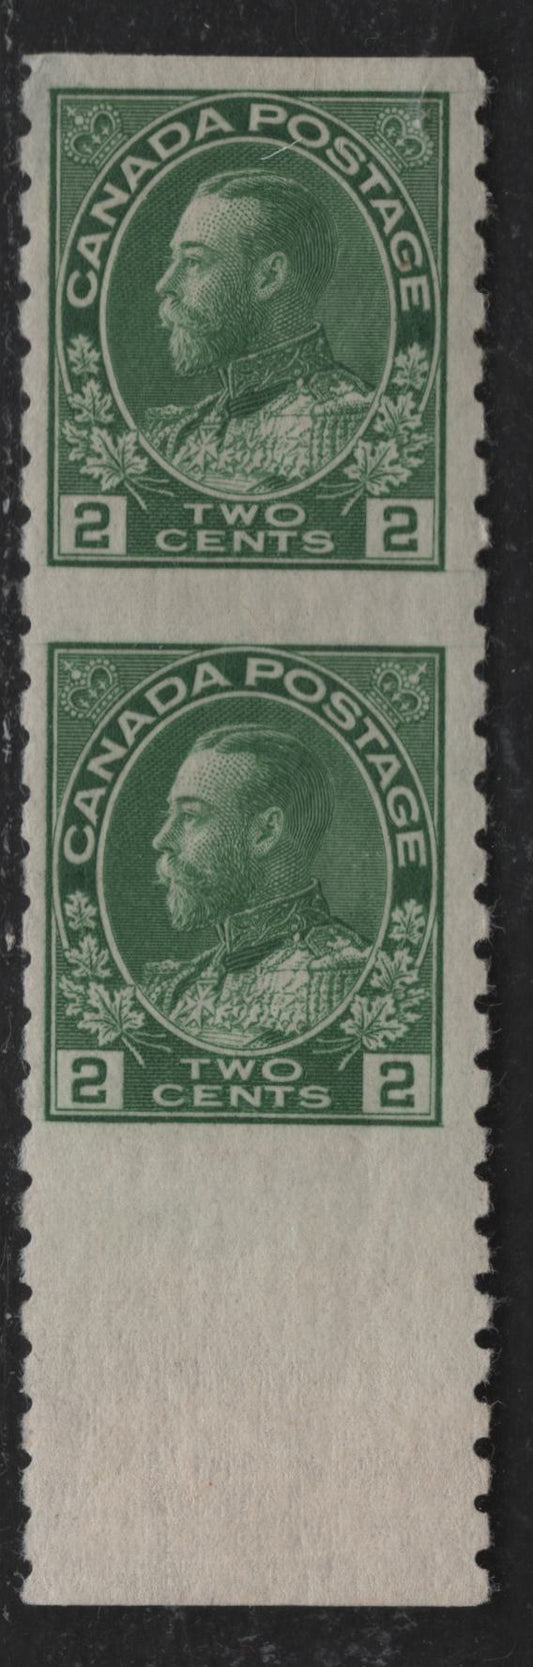 Lot 91 Canada #128a 2c Green King George V, 1911-1928 Admiral Issue, A Fine OG Part Perforate Coil Pair, Perforated 8 Vertically, Dry Printing